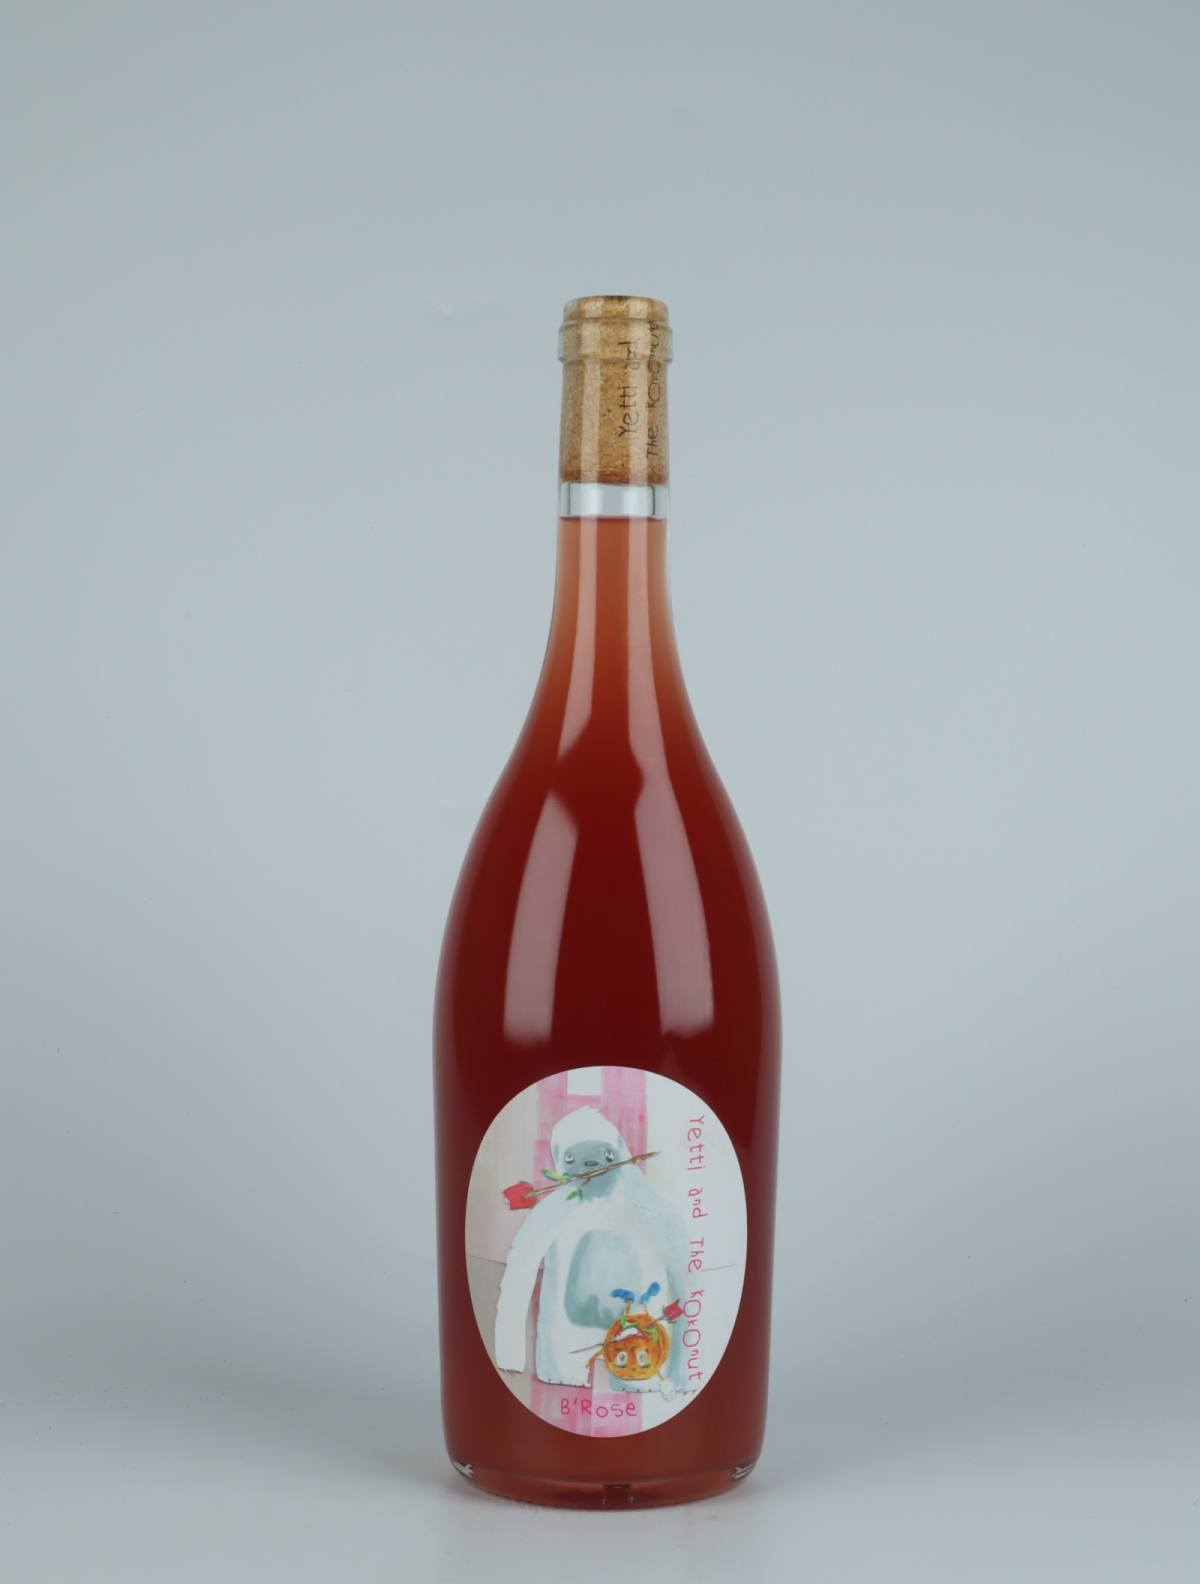 A bottle 2021 B'Rose Rosé from Yetti and the Kokonut, Adelaide Hills in Australia